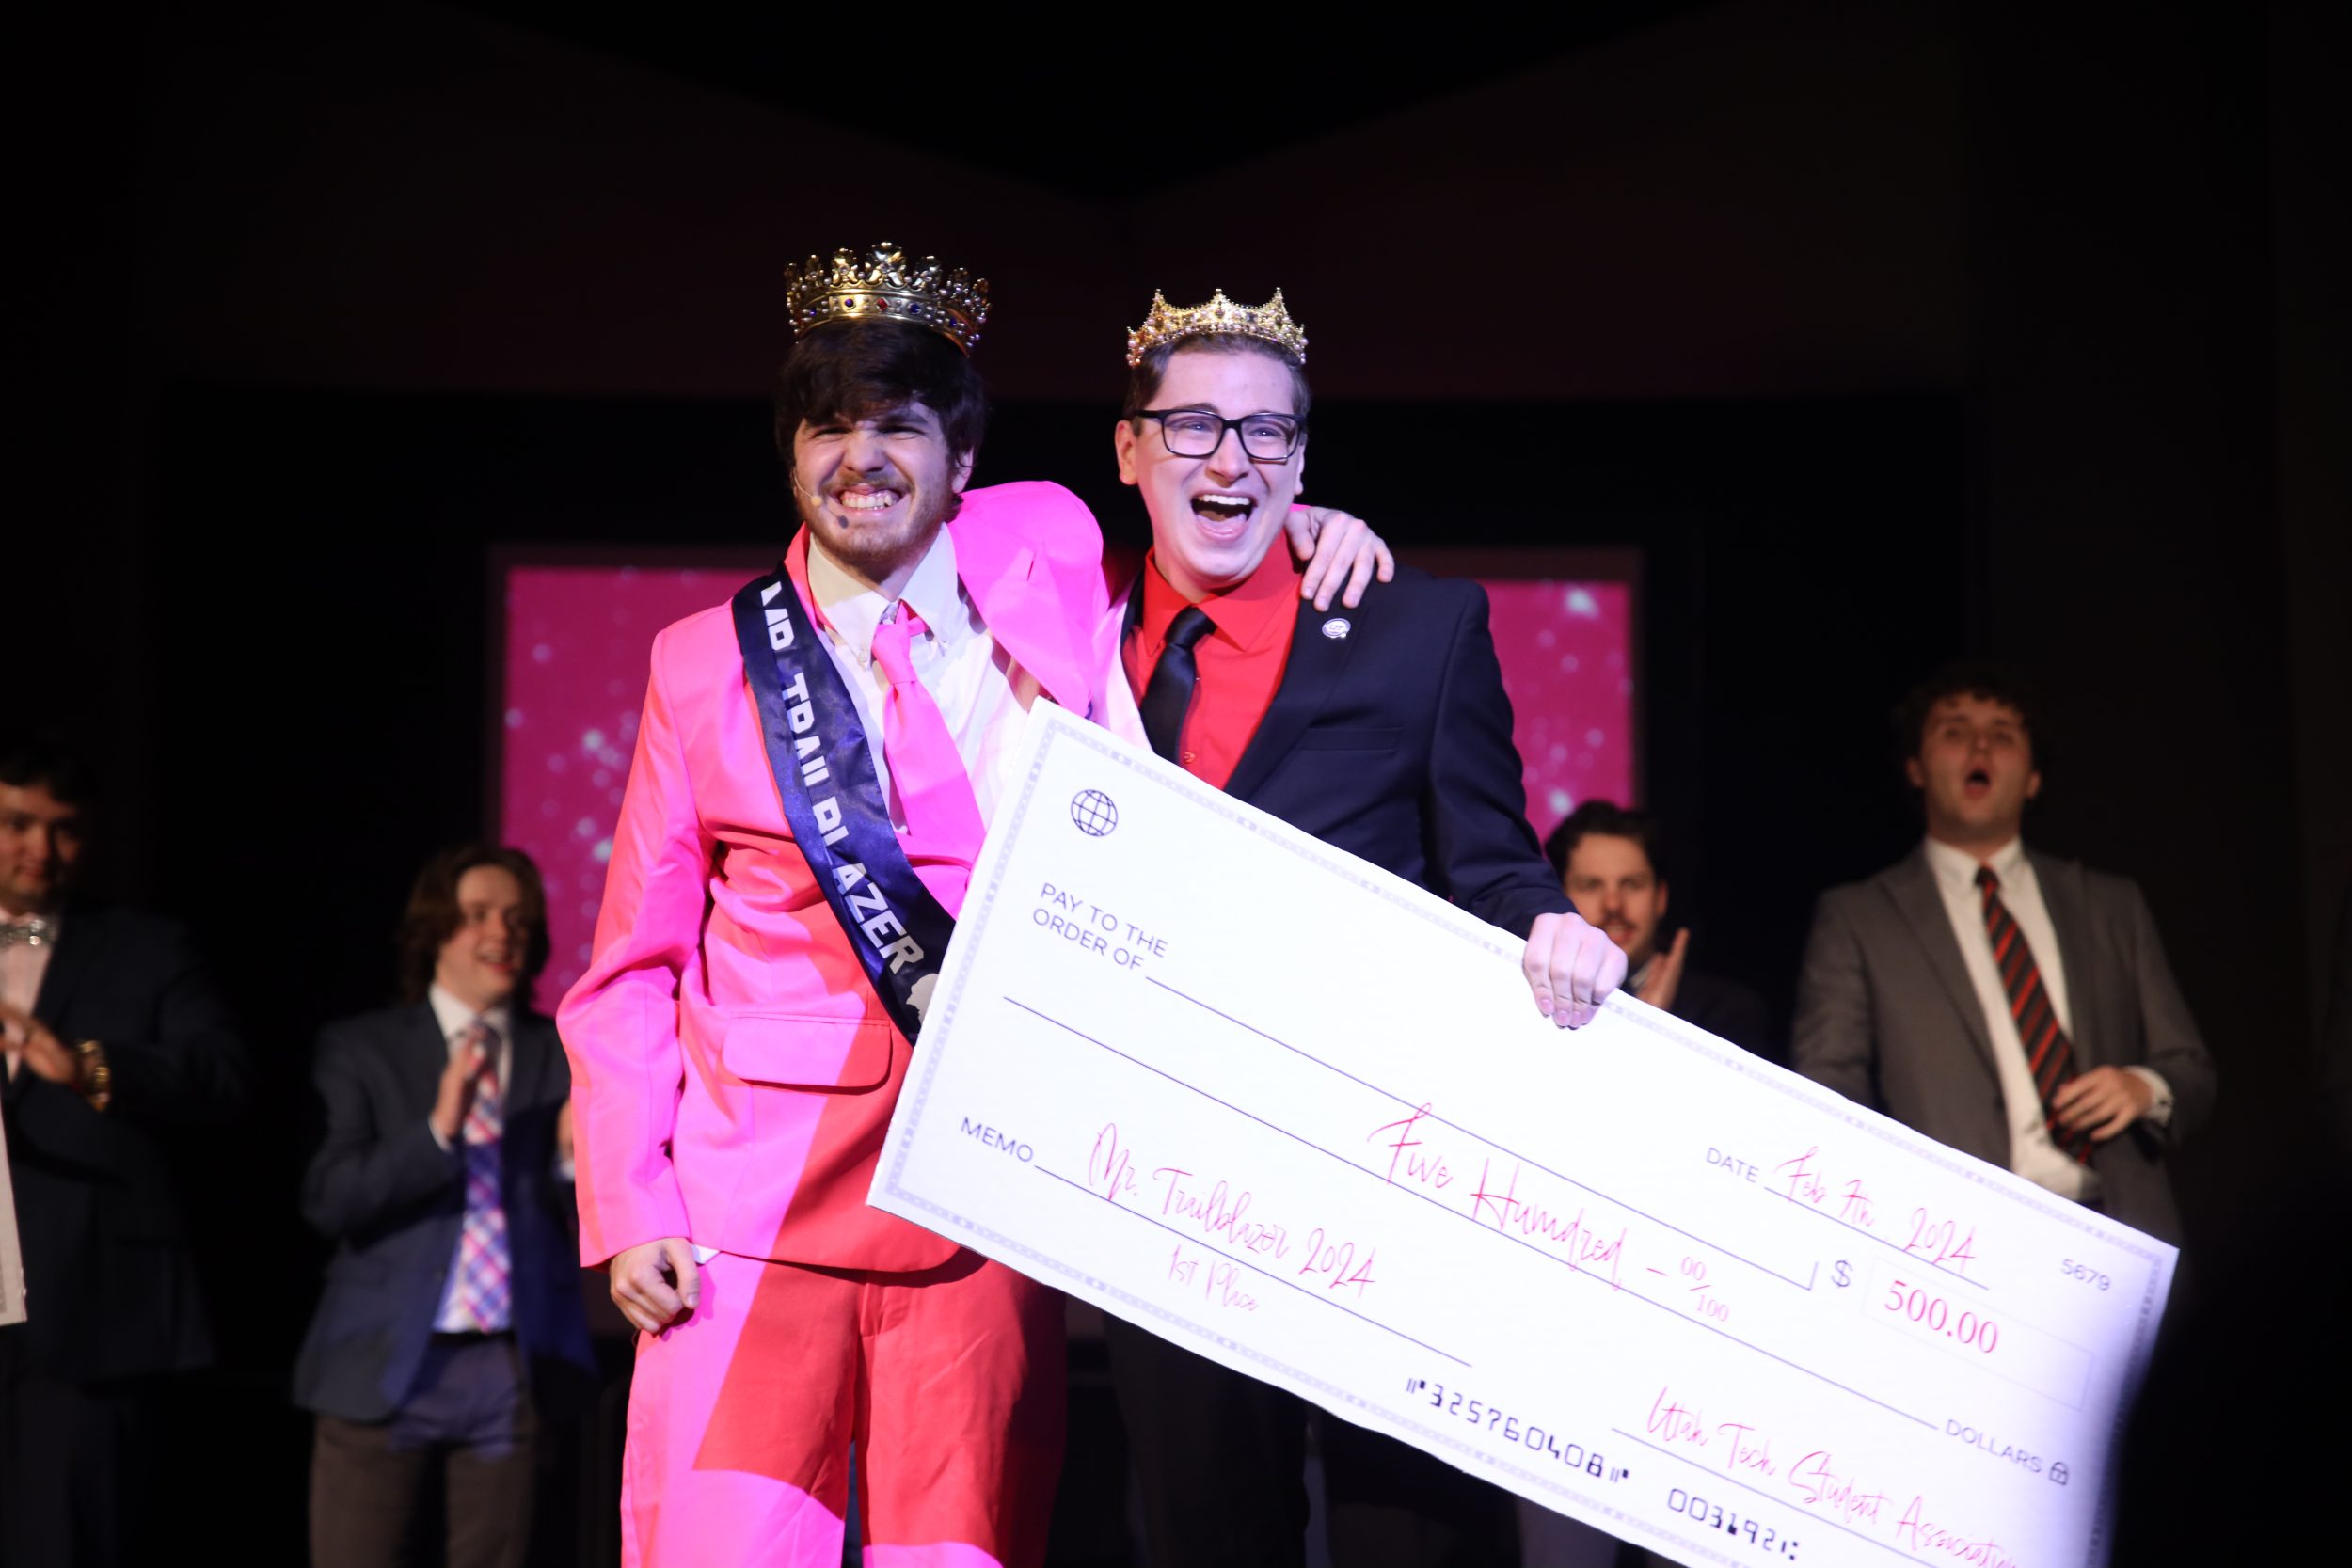 From Ken costumes to confident performances, here’s what happened at Mr. Trailblazer